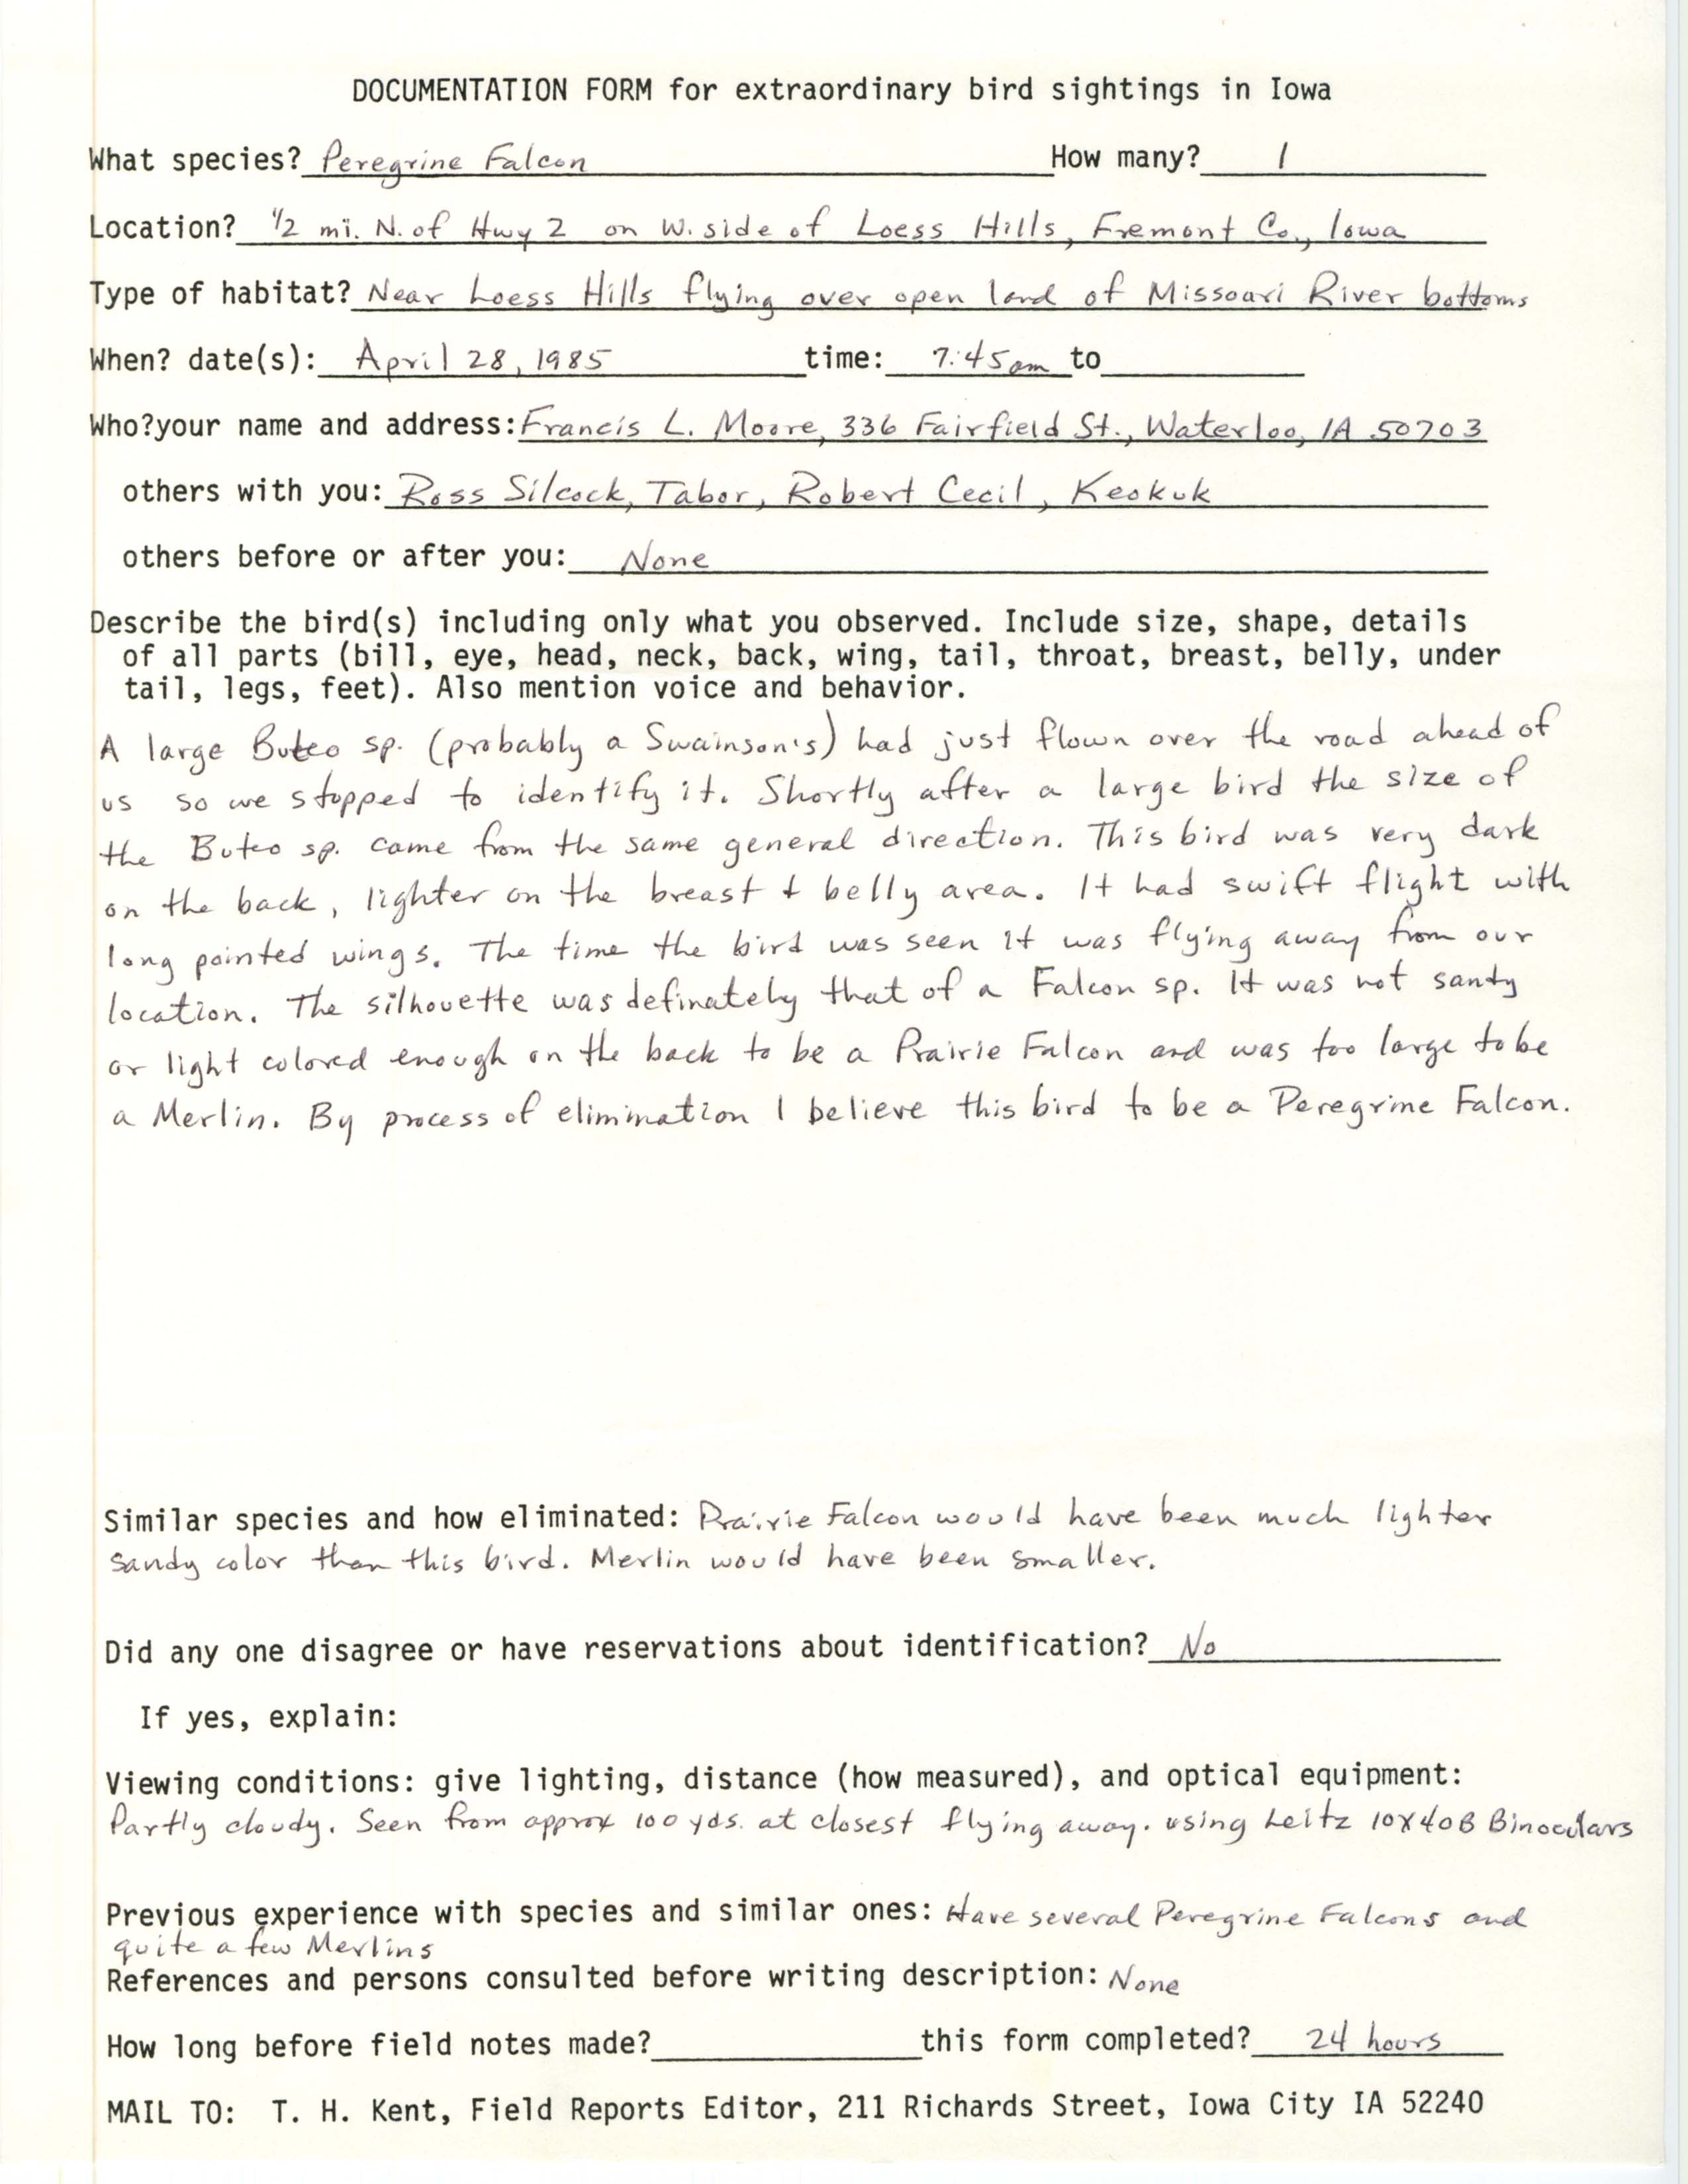 Rare bird documentation form for Peregrine Falcon at Loess Hills, 1985